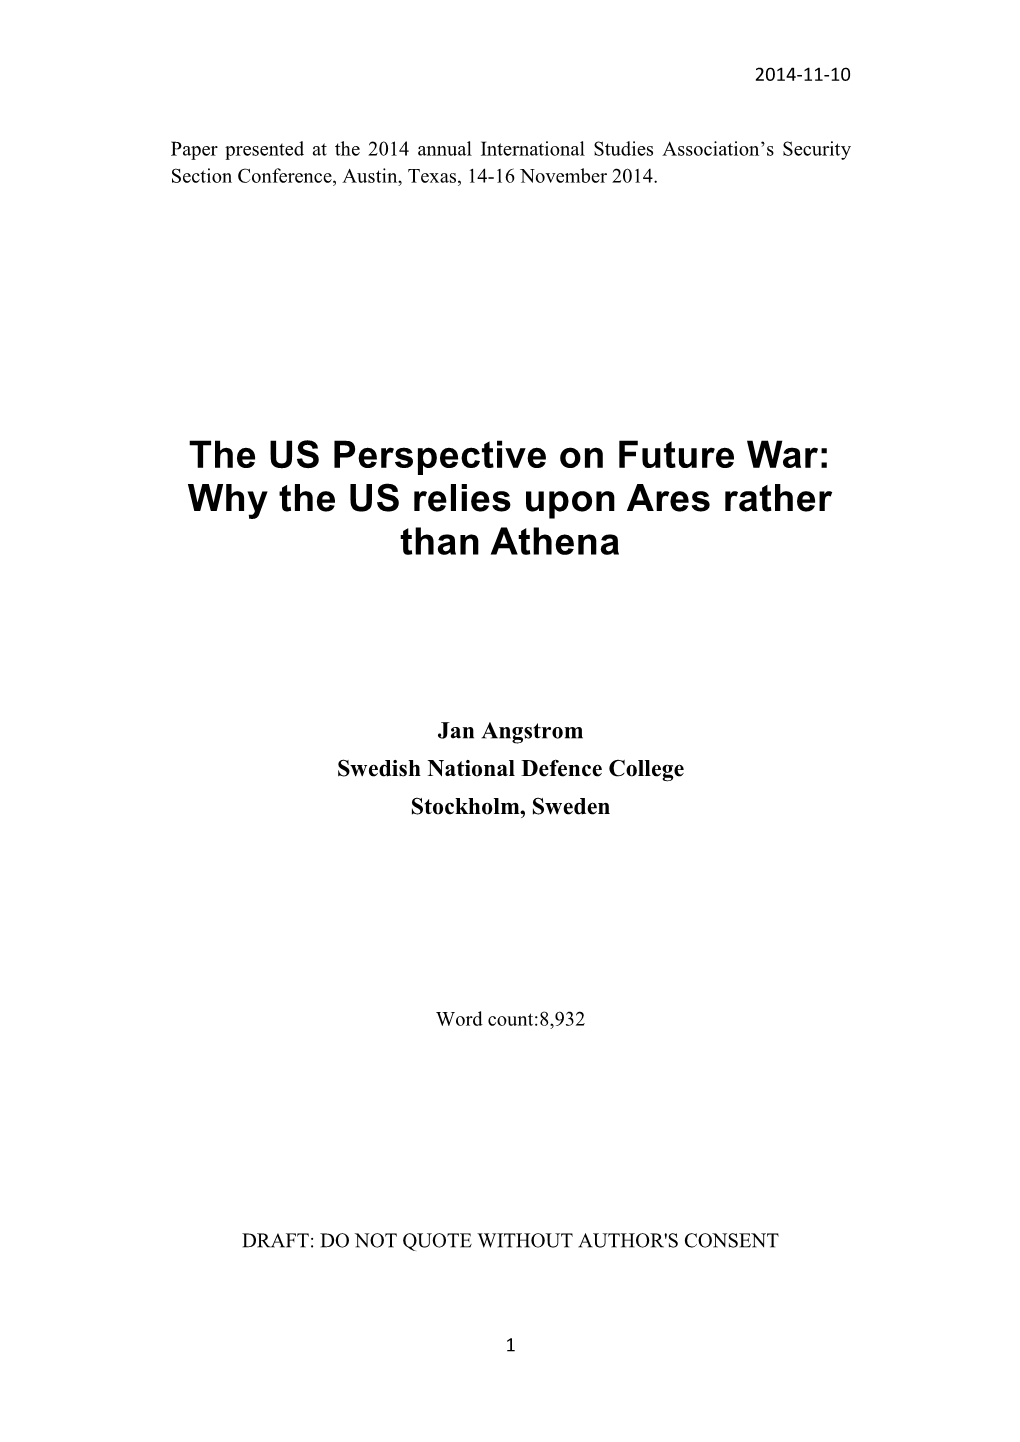 Why the US Relies Upon Ares Rather Than Athena